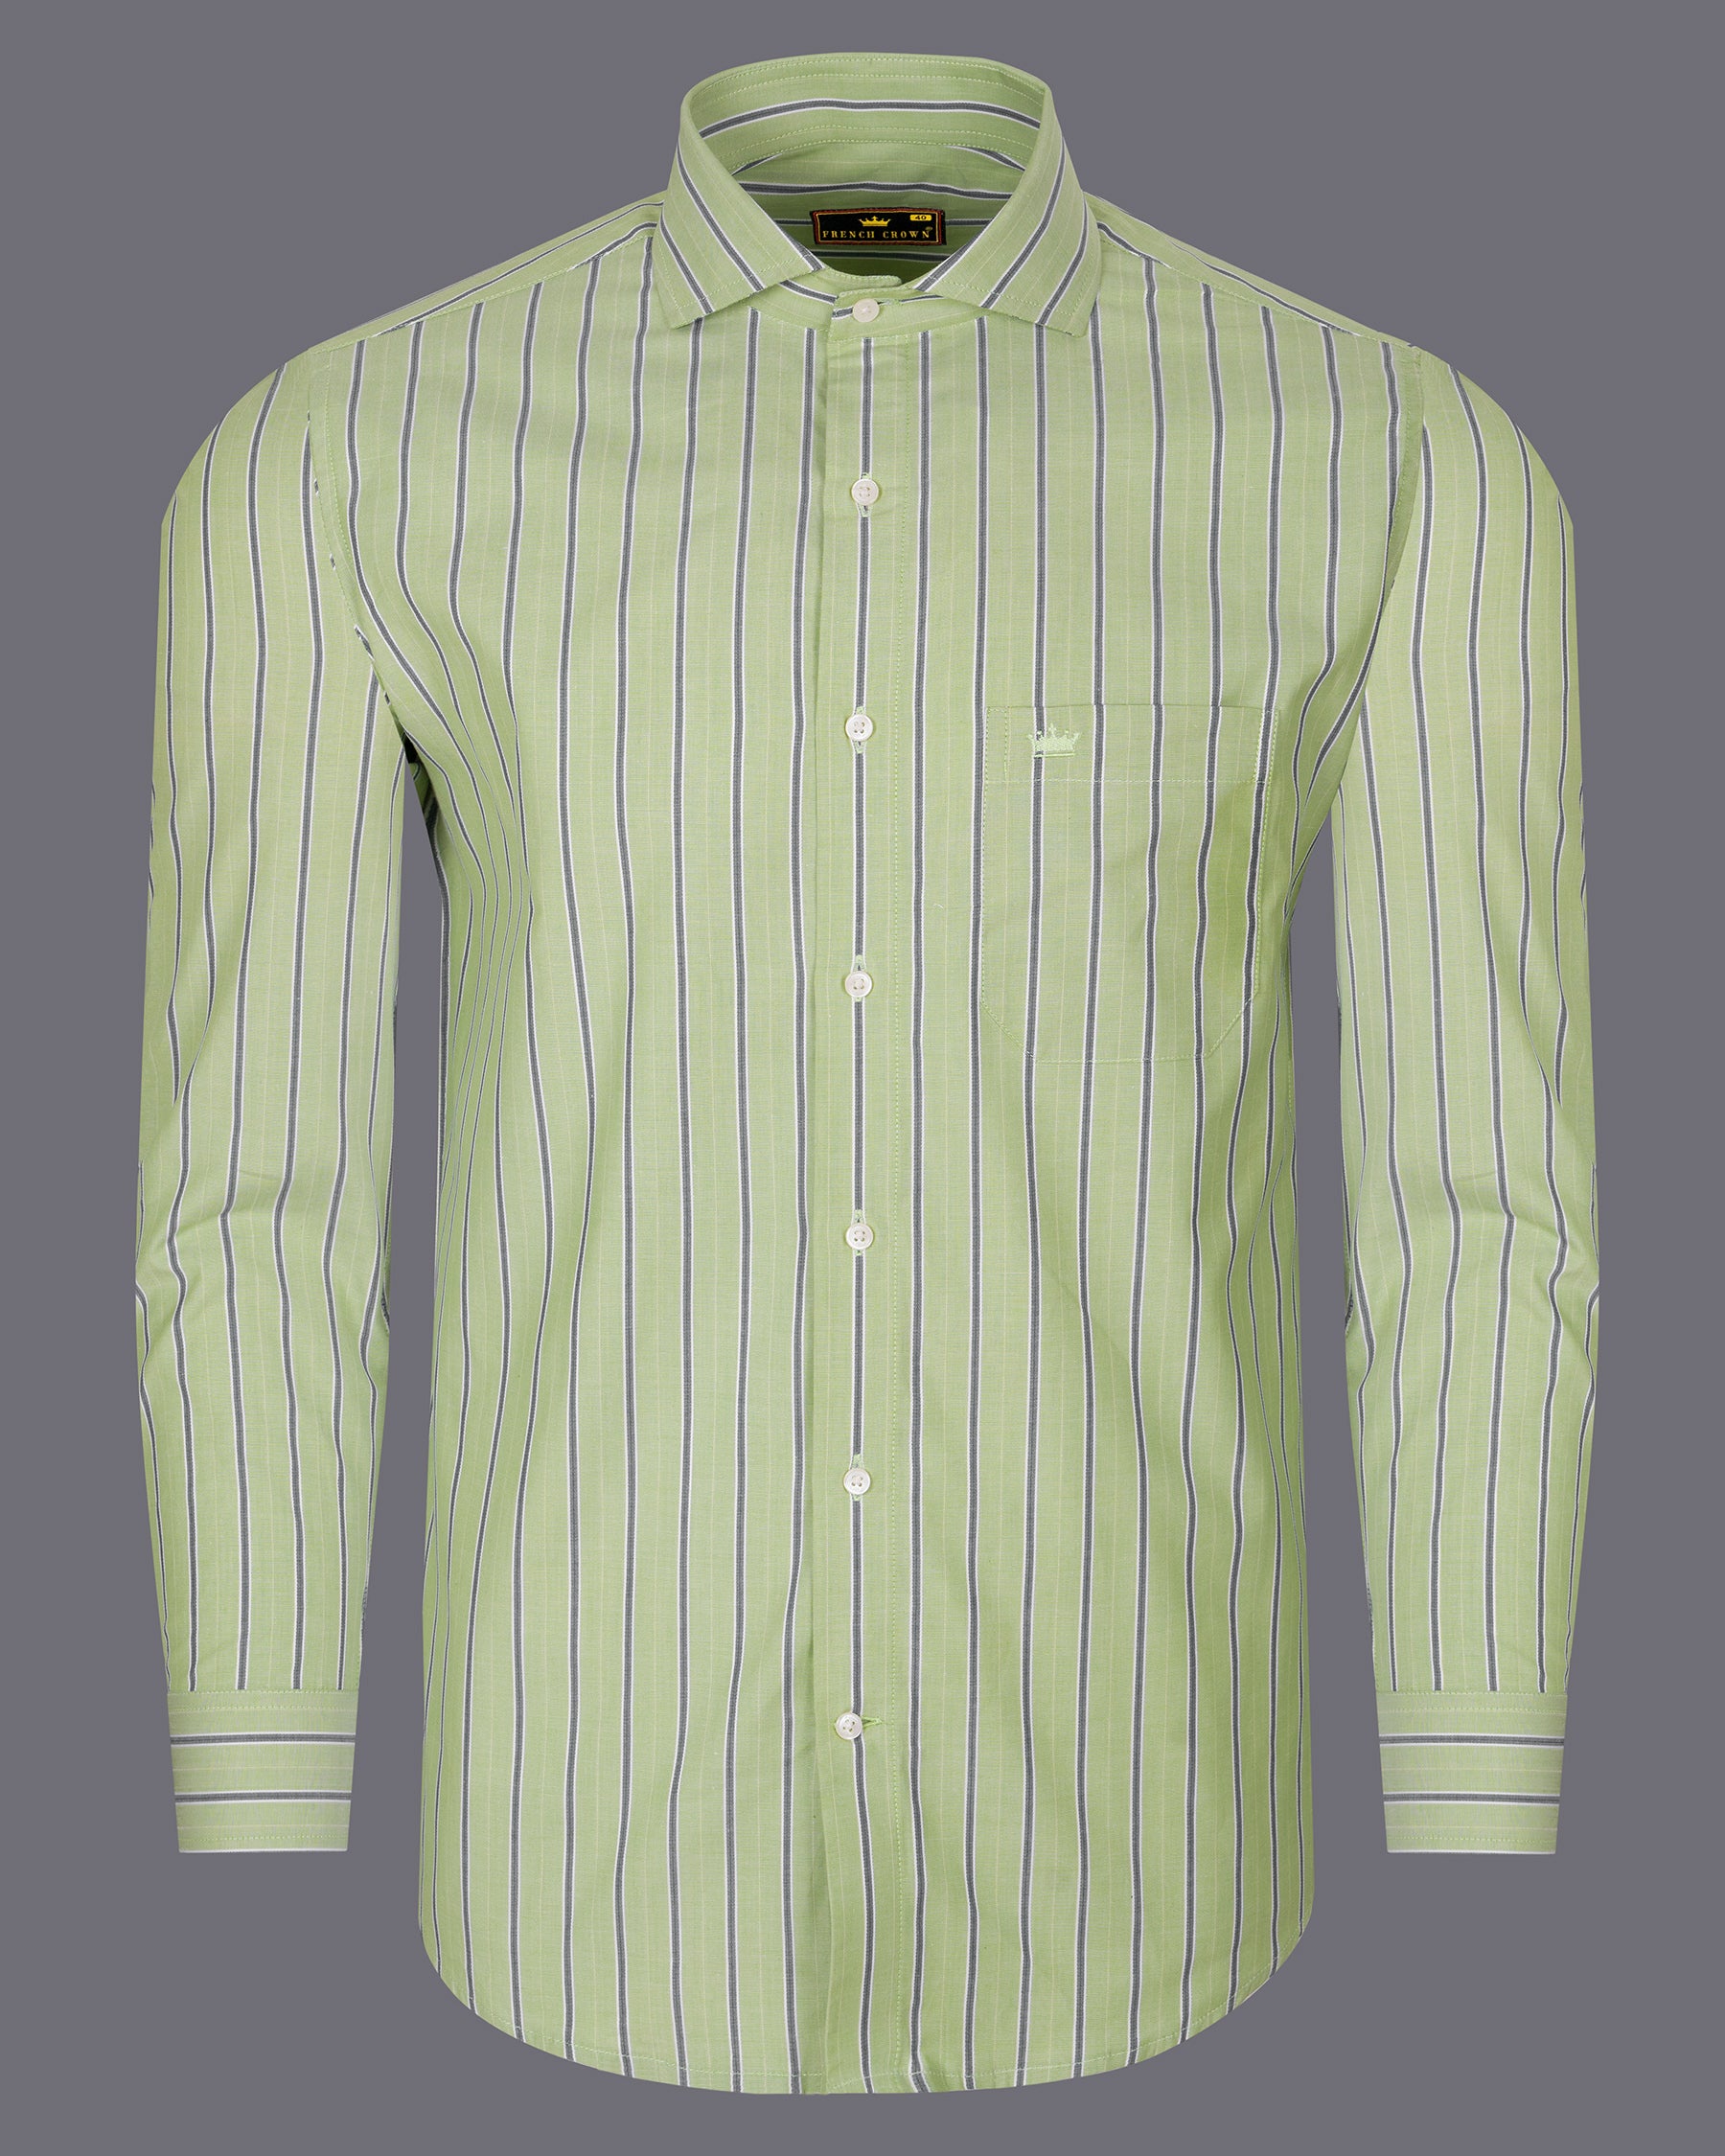 Swamp Green with Storm Dust Stripes Premium Cotton Shirt 5225-CA-38, 5225-CA-H-38, 5225-CA-39, 5225-CA-H-39, 5225-CA-40, 5225-CA-H-40, 5225-CA-42, 5225-CA-H-42, 5225-CA-44, 5225-CA-H-44, 5225-CA-46, 5225-CA-H-46, 5225-CA-48, 5225-CA-H-48, 5225-CA-50, 5225-CA-H-50, 5225-CA-52, 5225-CA-H-52